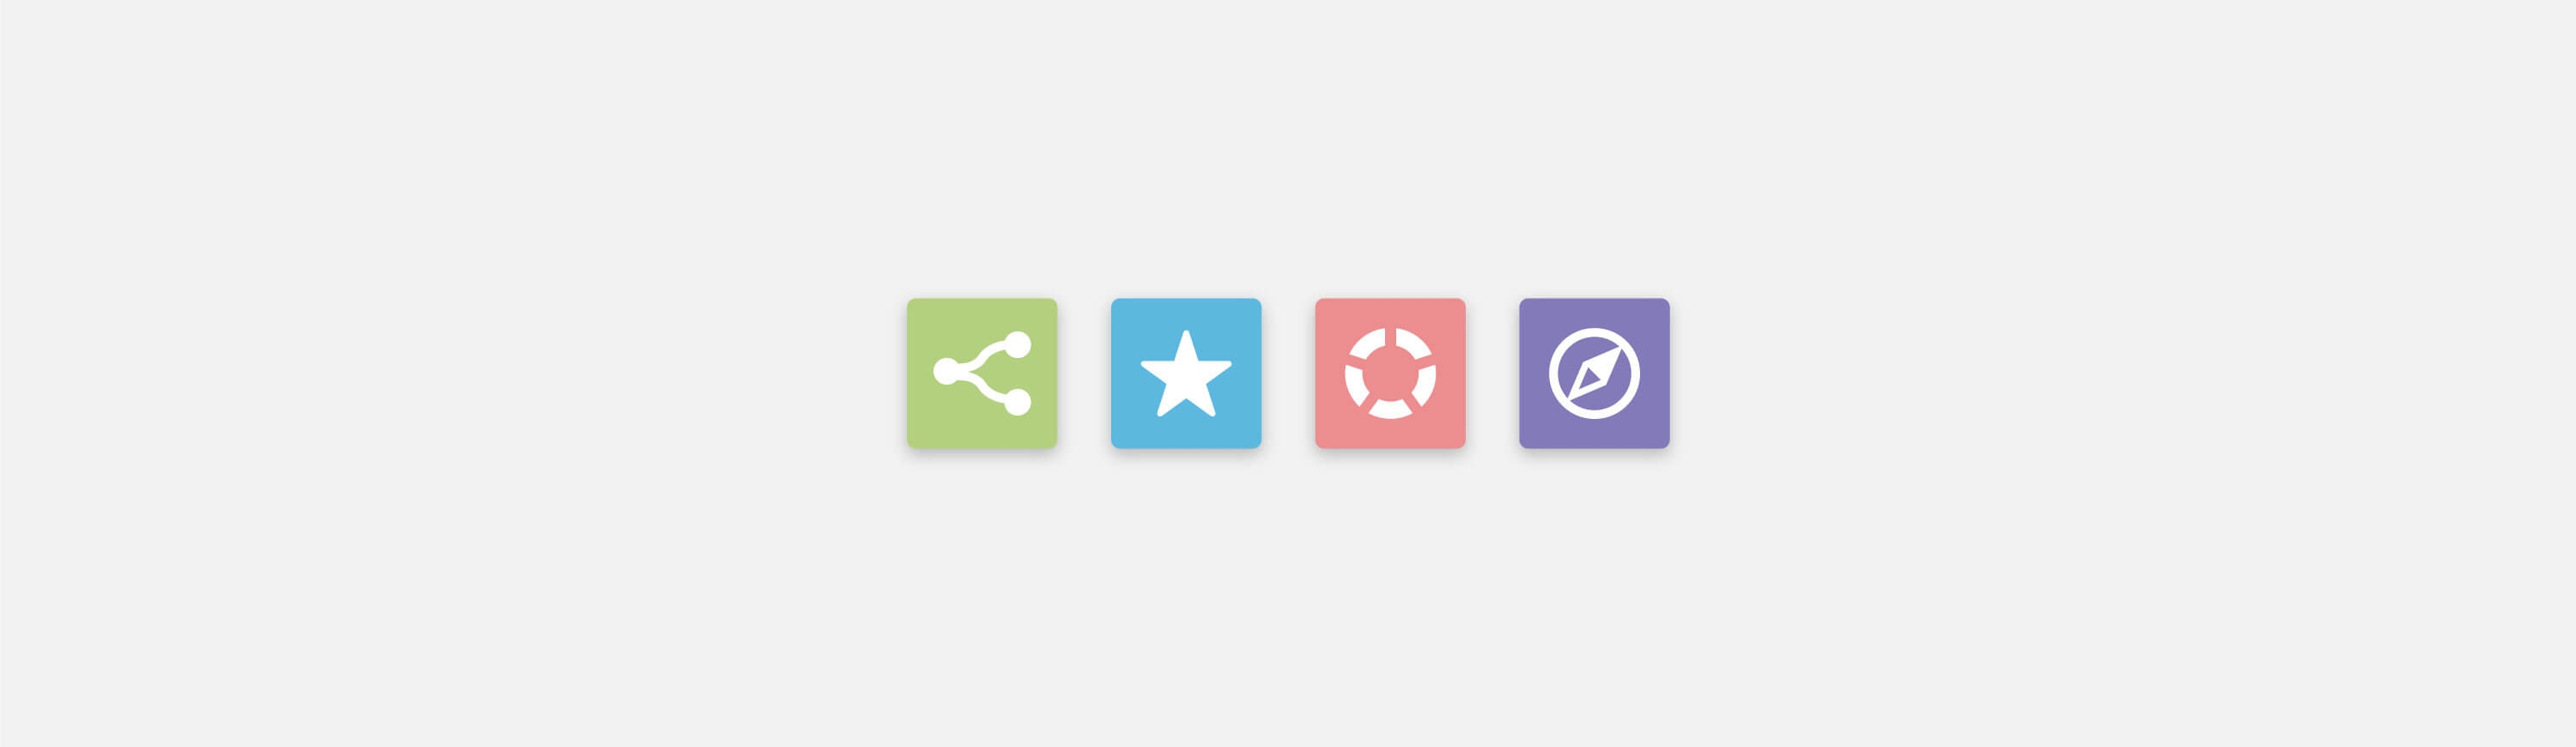 Illustration of icons for our four products: Connect, Recognize, Lead, and Listen.